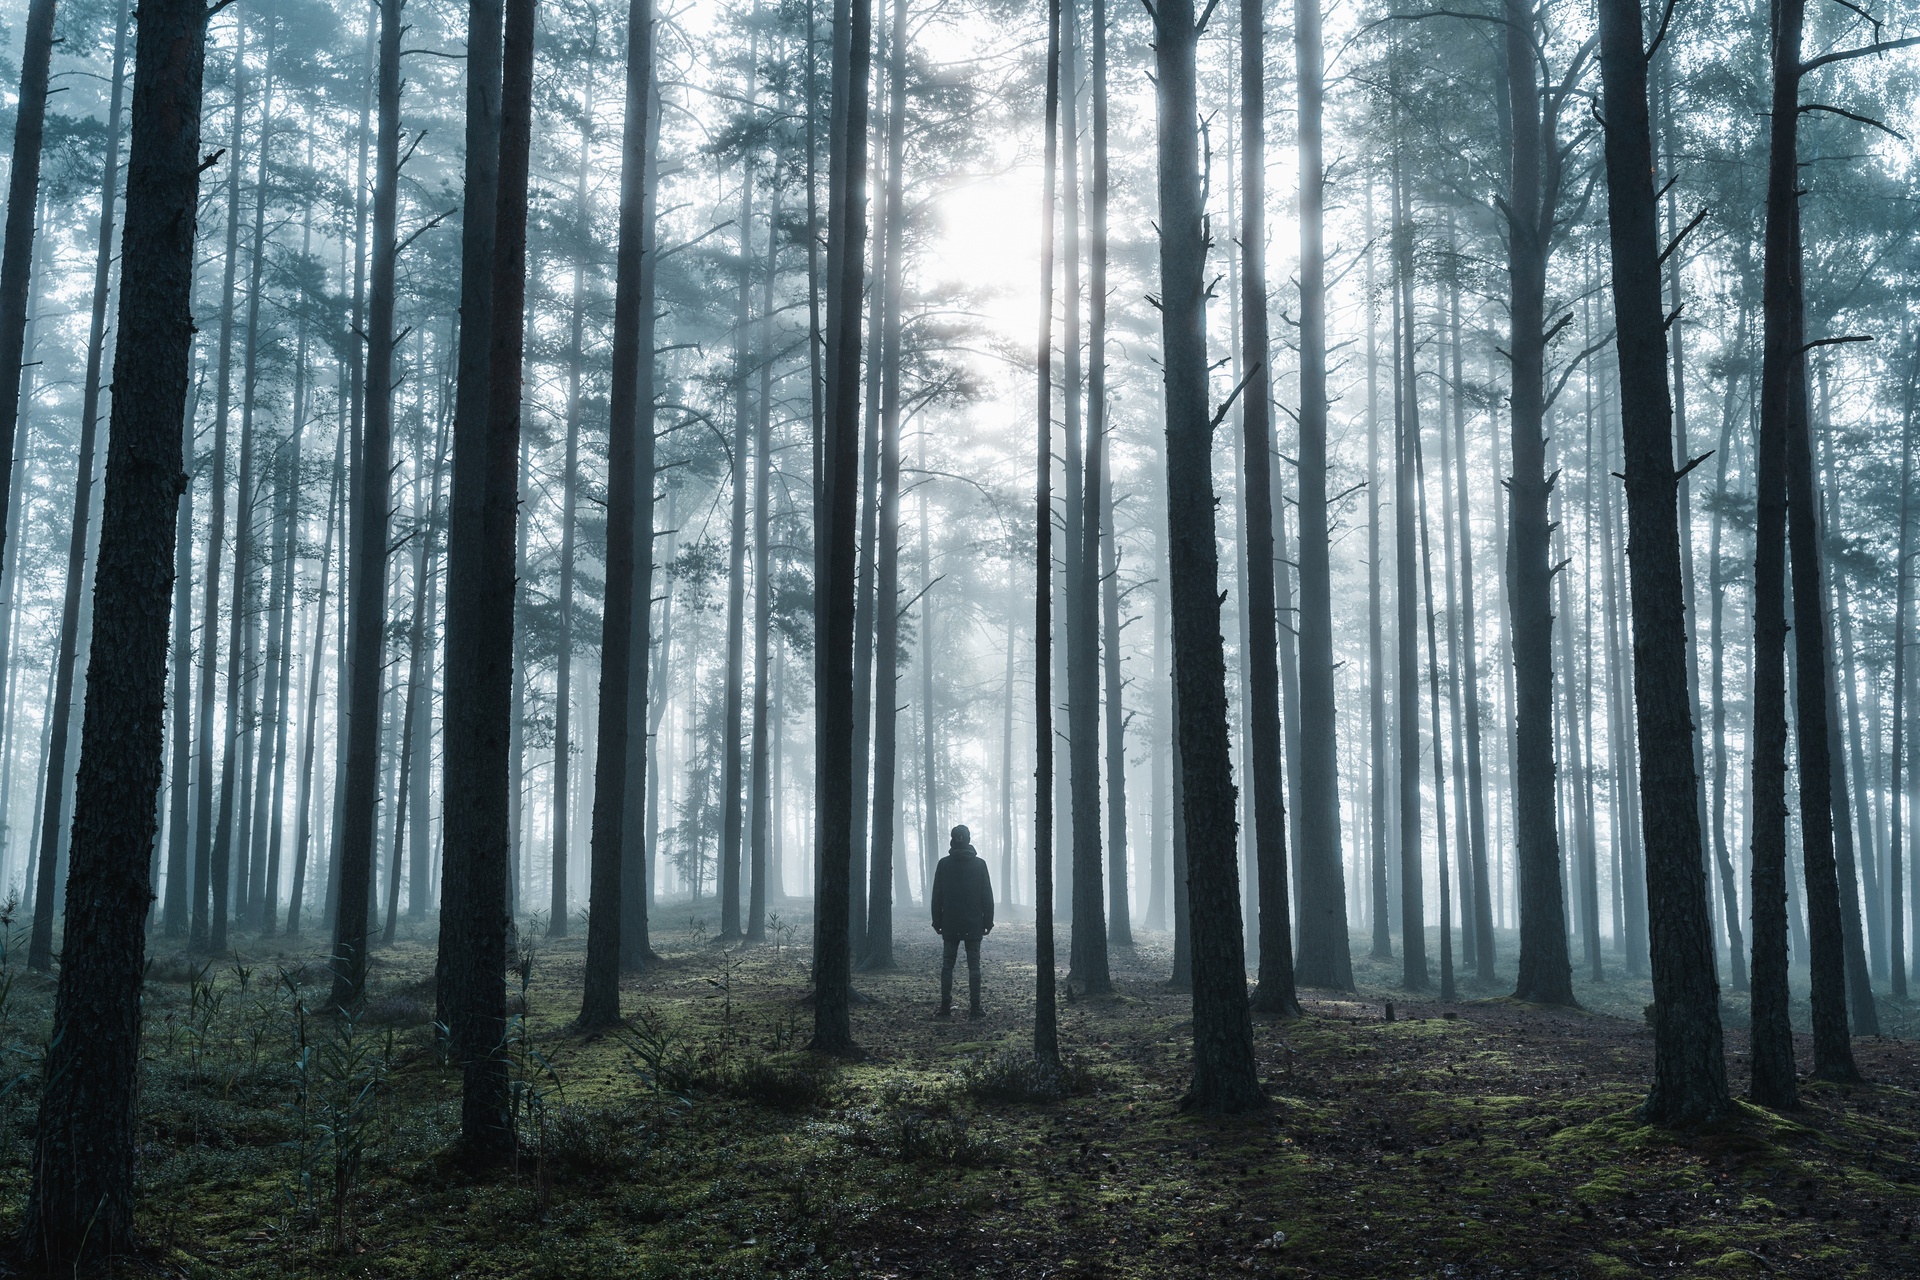 Man stands alone in a misty forest